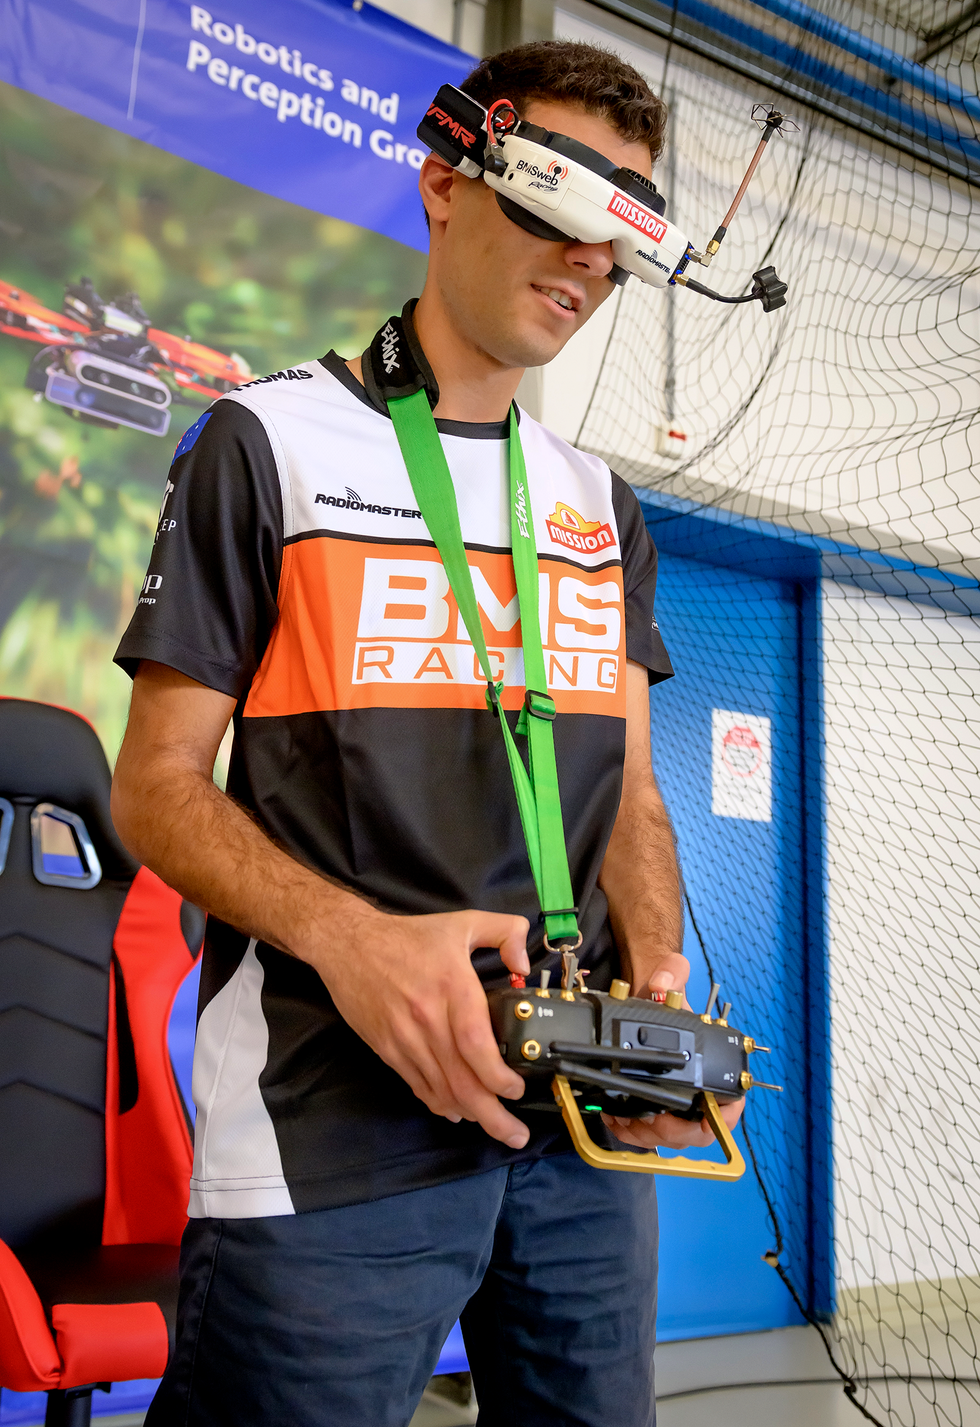 A person wearing goggles and holding a set of remote controls.